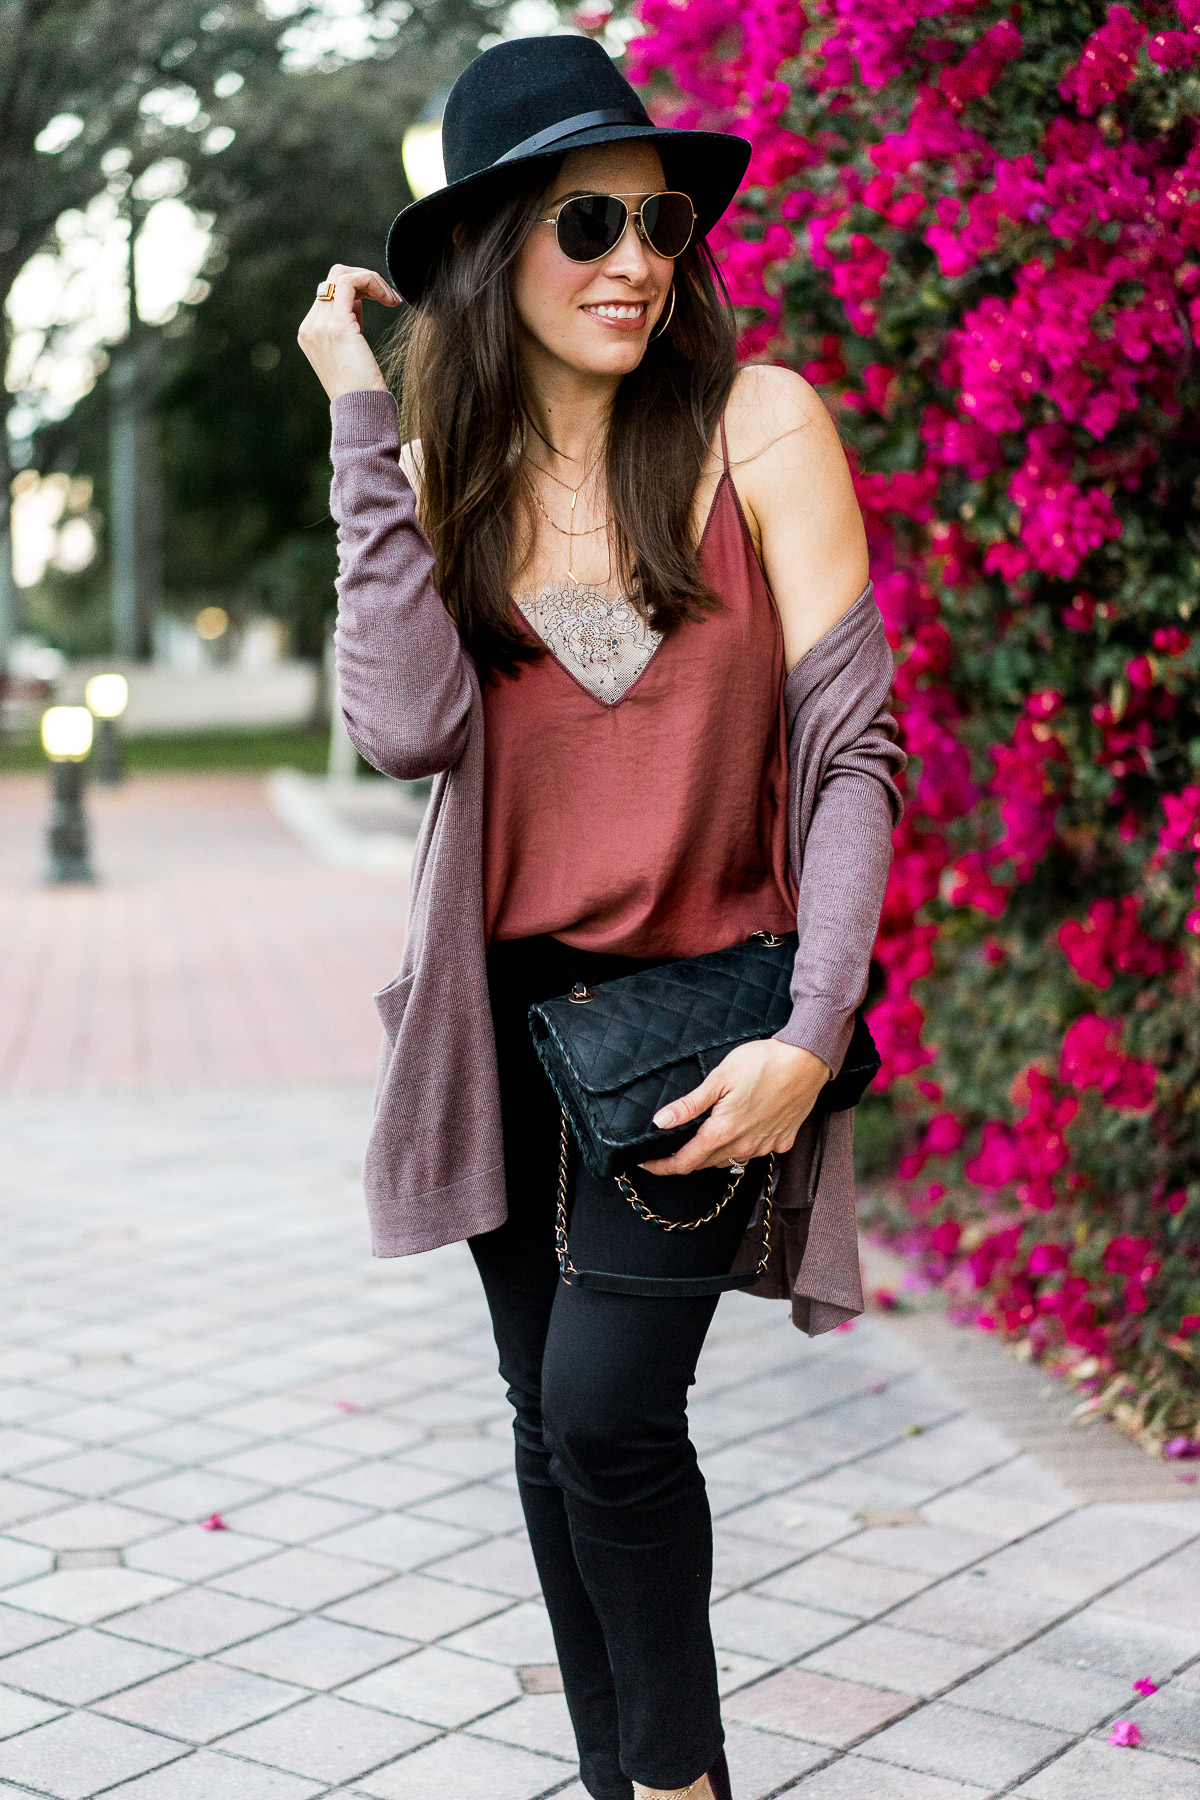 Free People Deep V Cami is styled by Amanda of AGlamLifestyle blog with classic Chanel bag and Old Navy open front cardigan